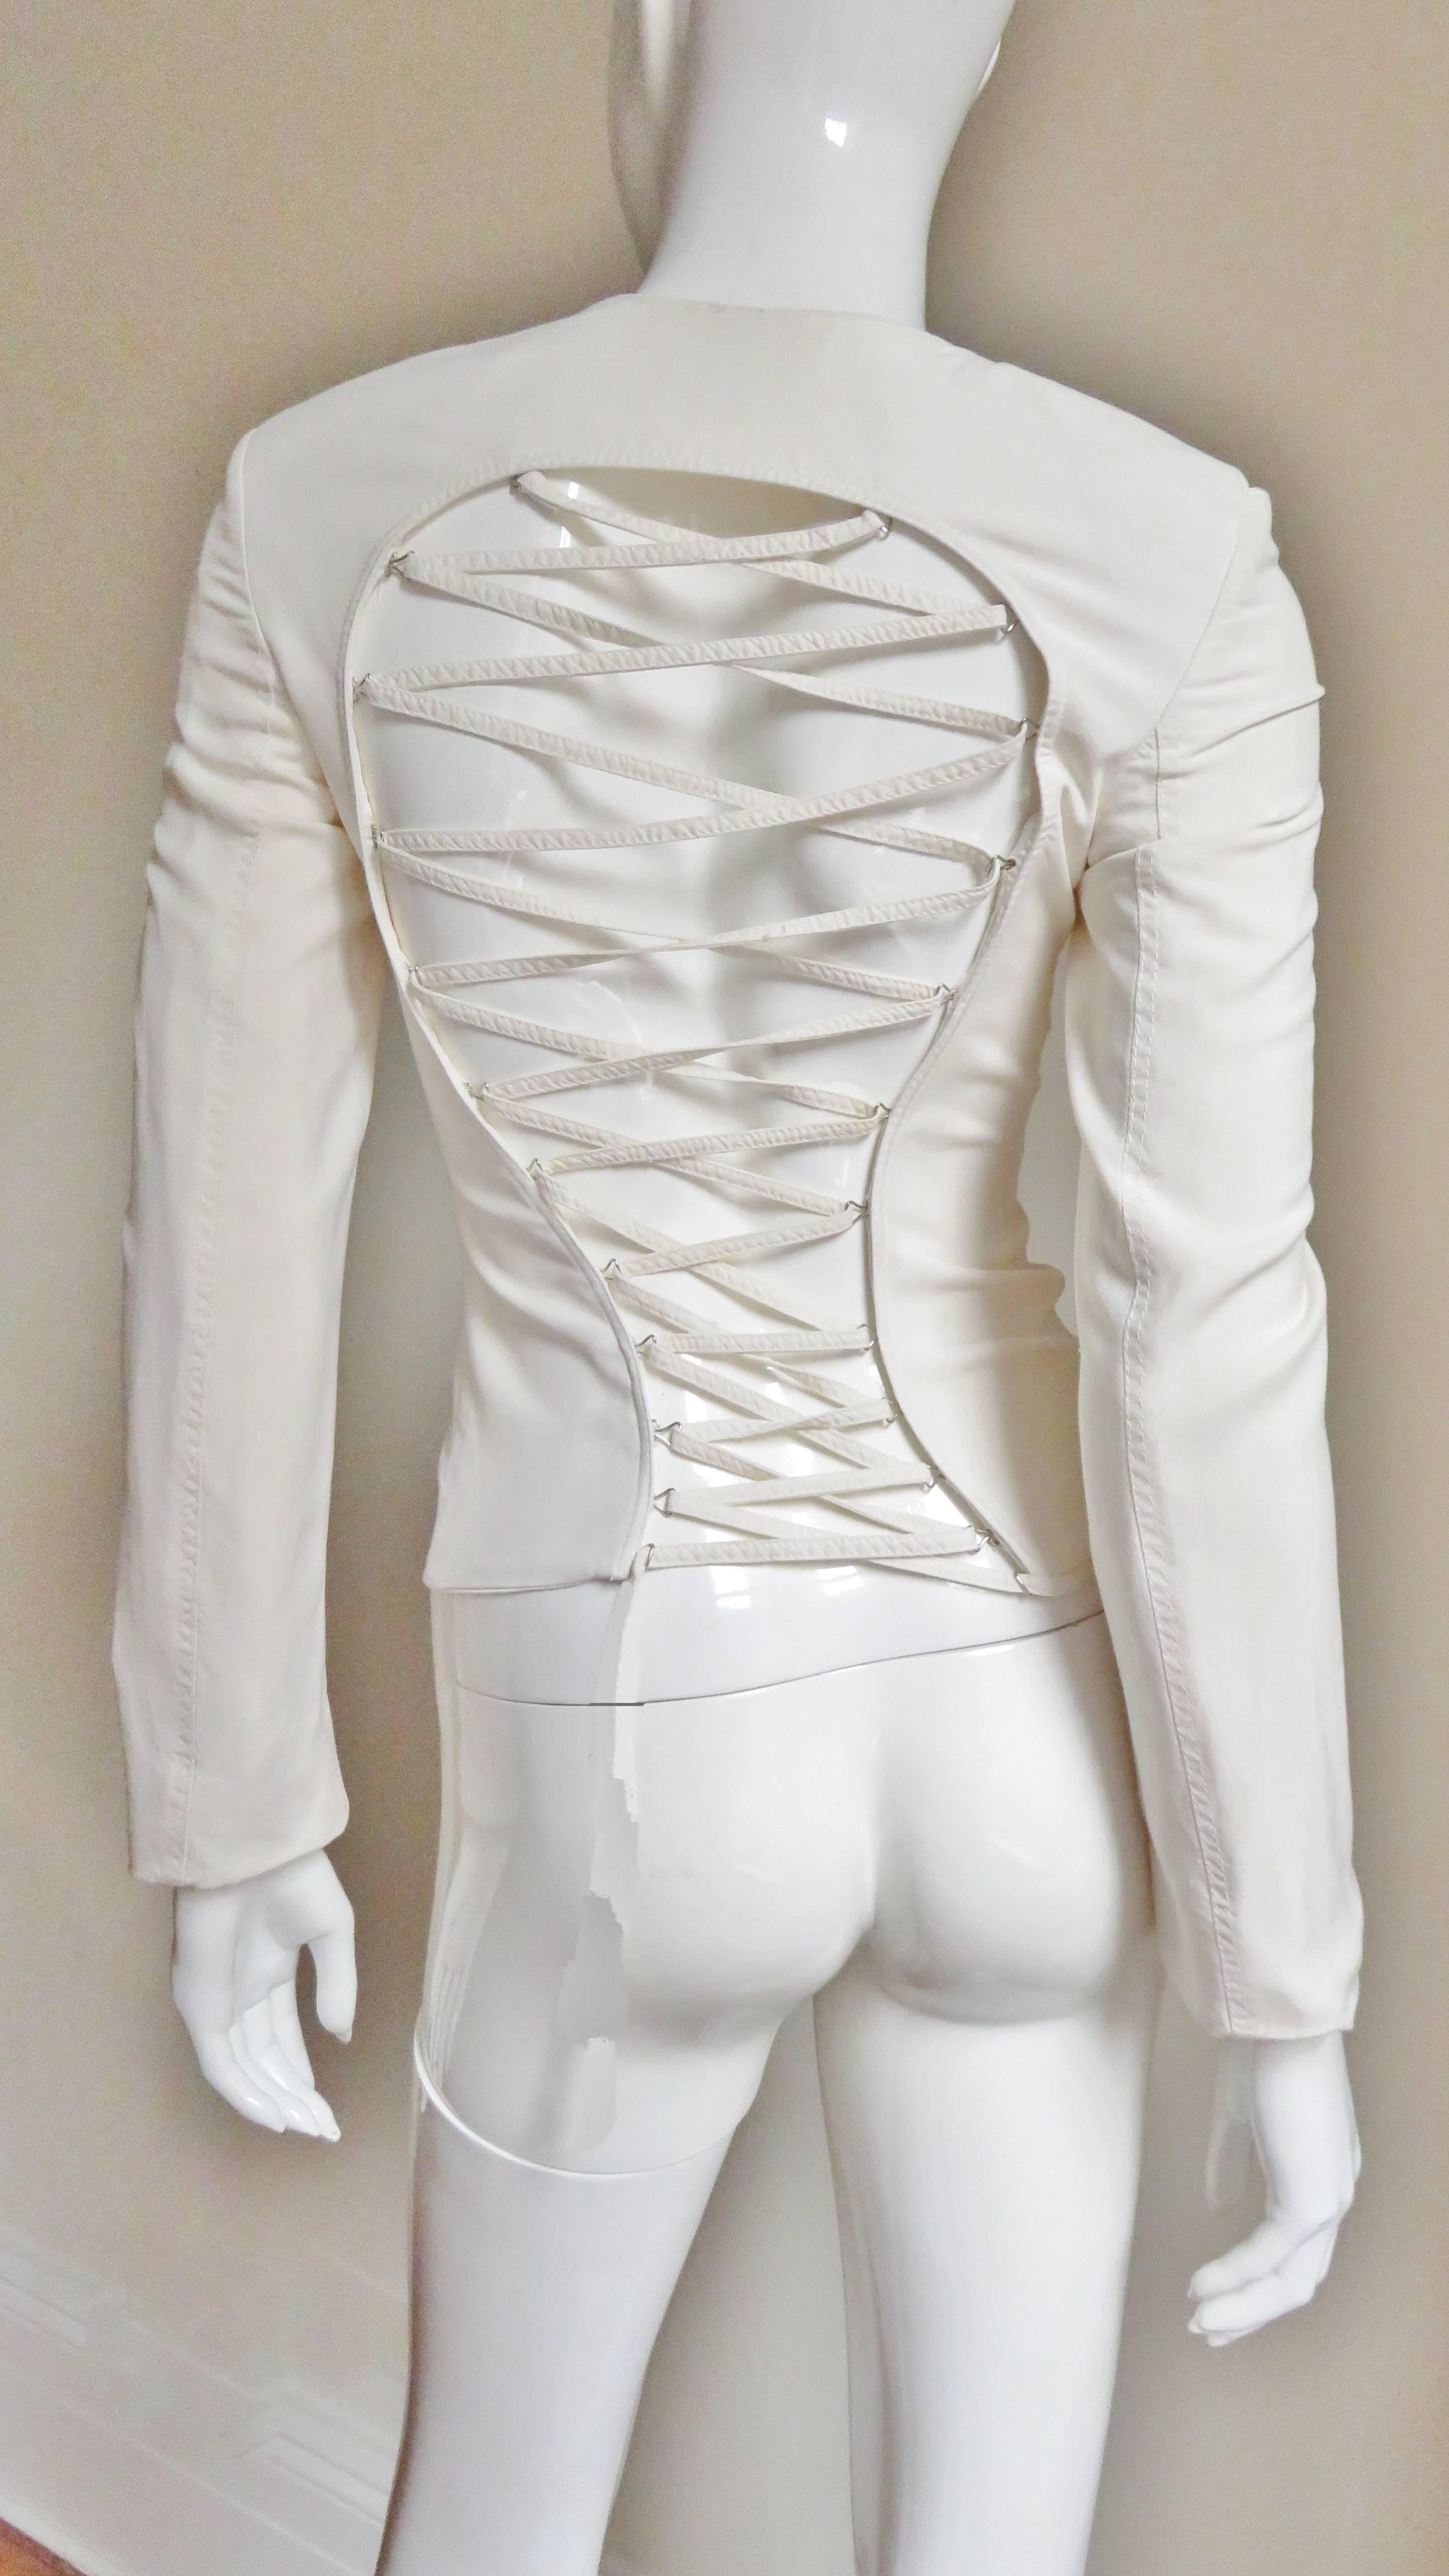 An incredible off white silk jacket from Gianni Versace Couture.  From the front it's a simple fitted, long sleeved, crew neck jacket closing with large hooks and eyes corset style. The back is fabulous with a large cutout to the bottom crisscrossed